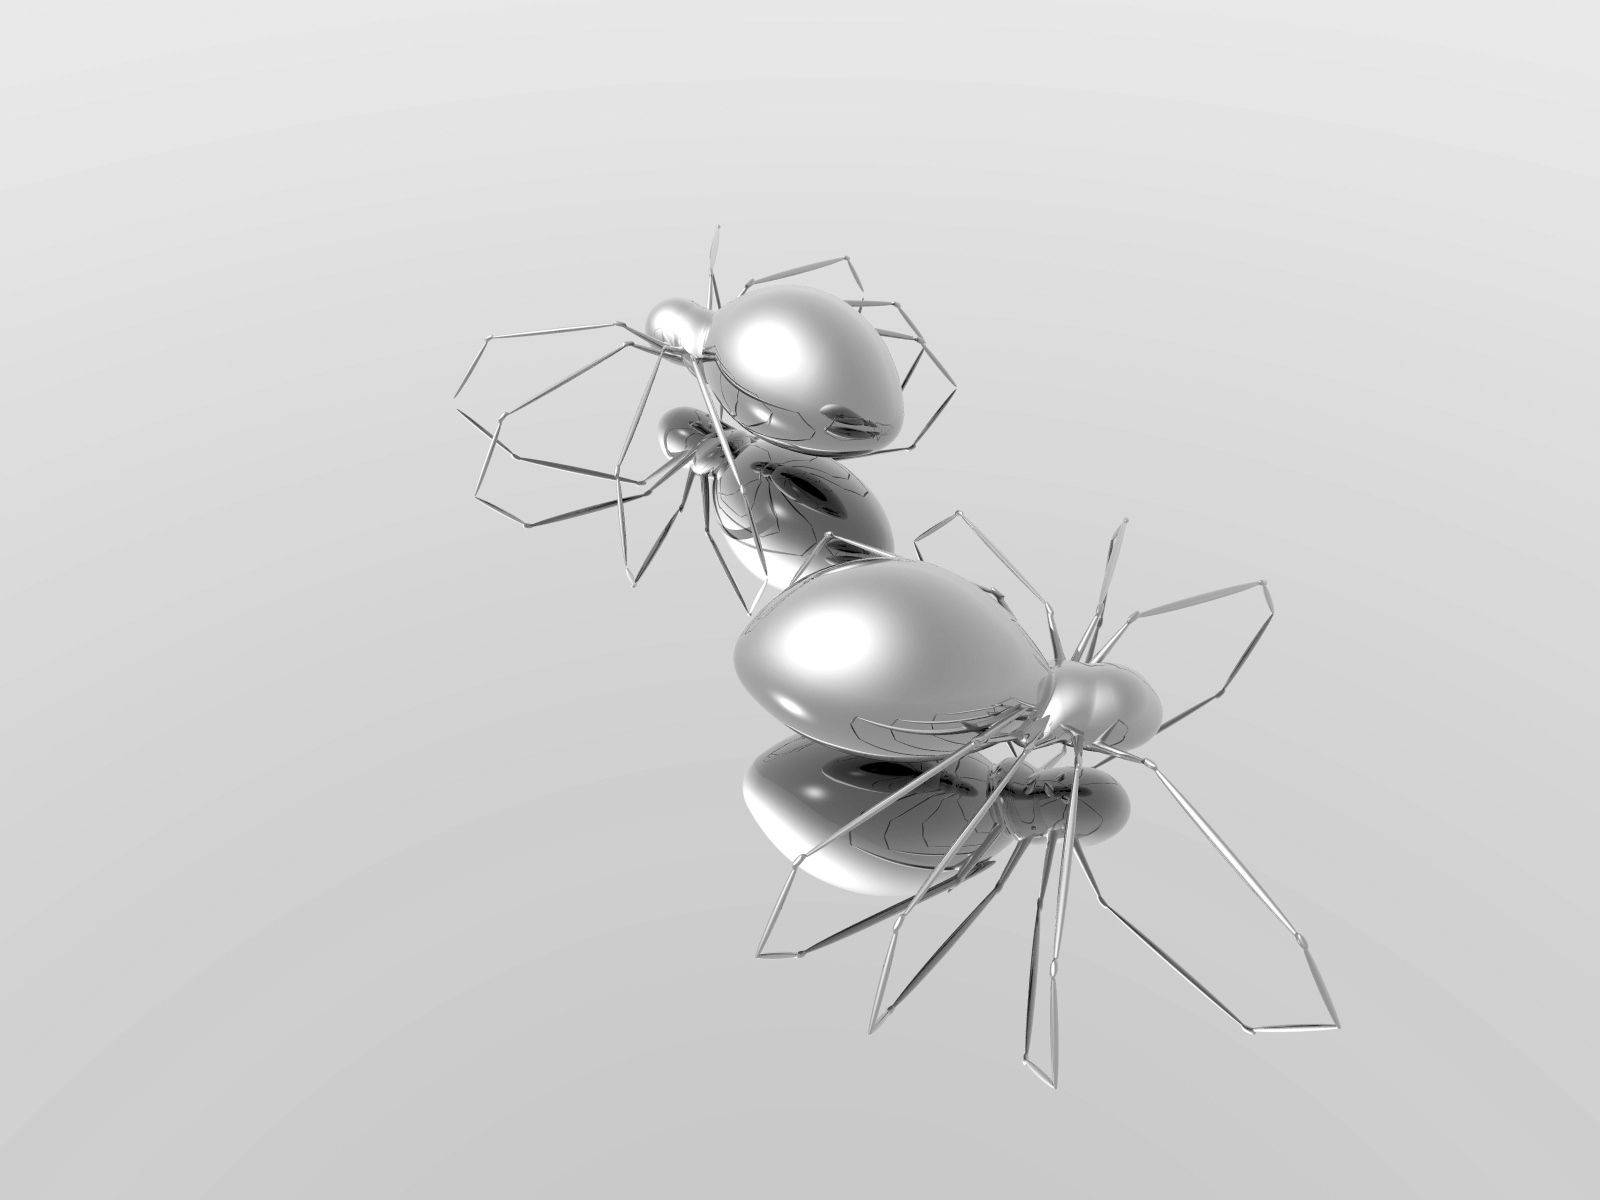 Two Silver Robot Spiders